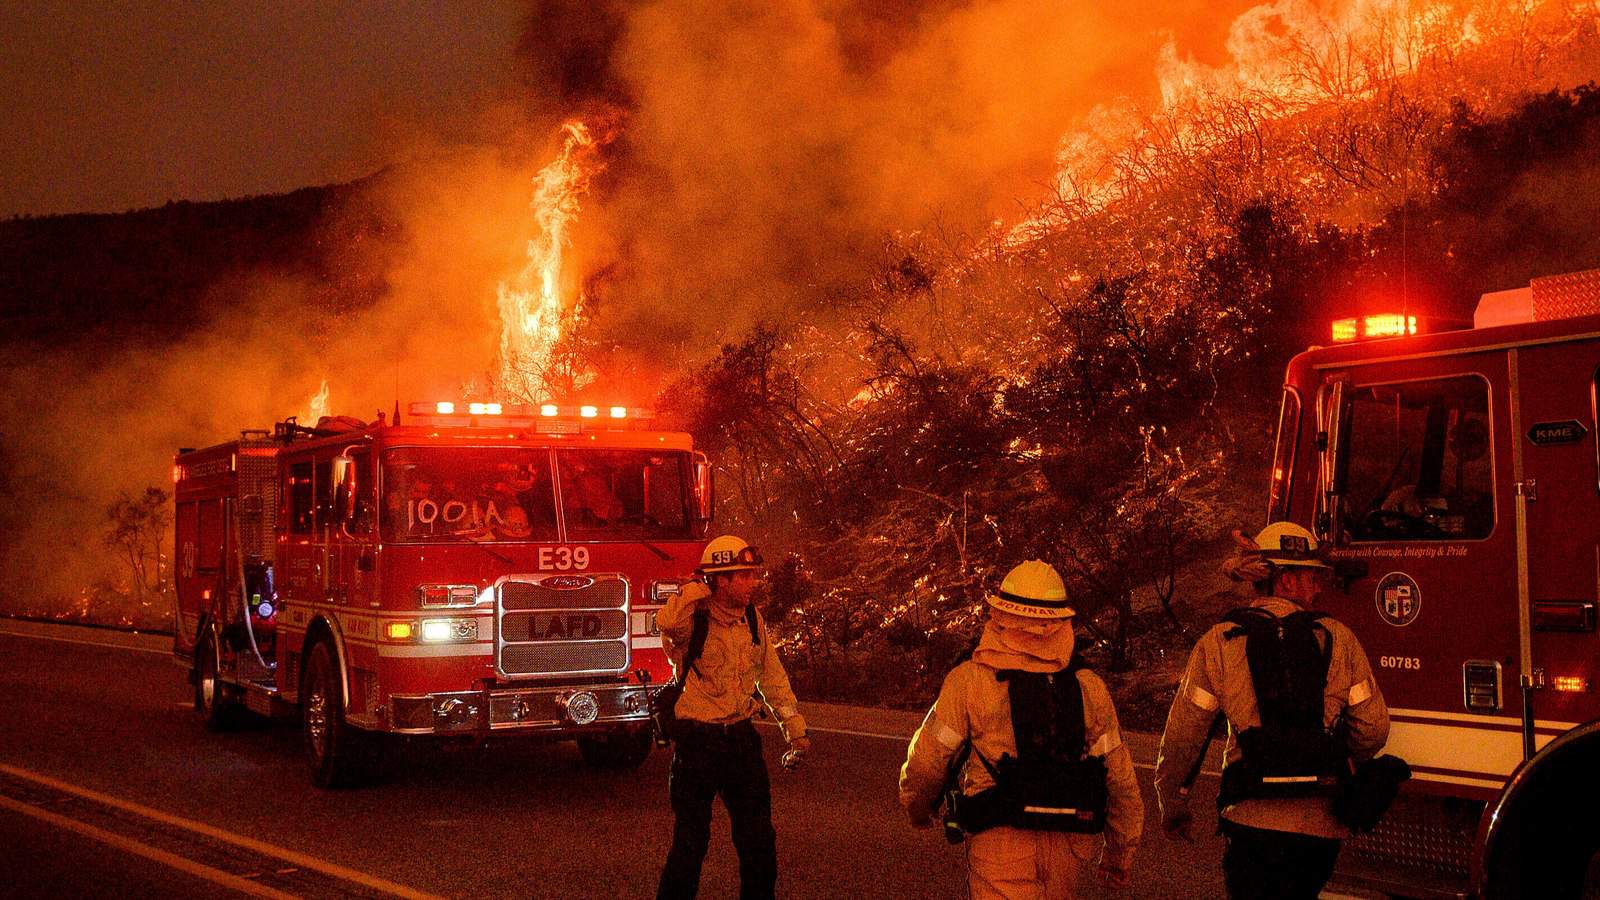 California Fire Levels Ground To Ashes: Millions Reeling Under Heat